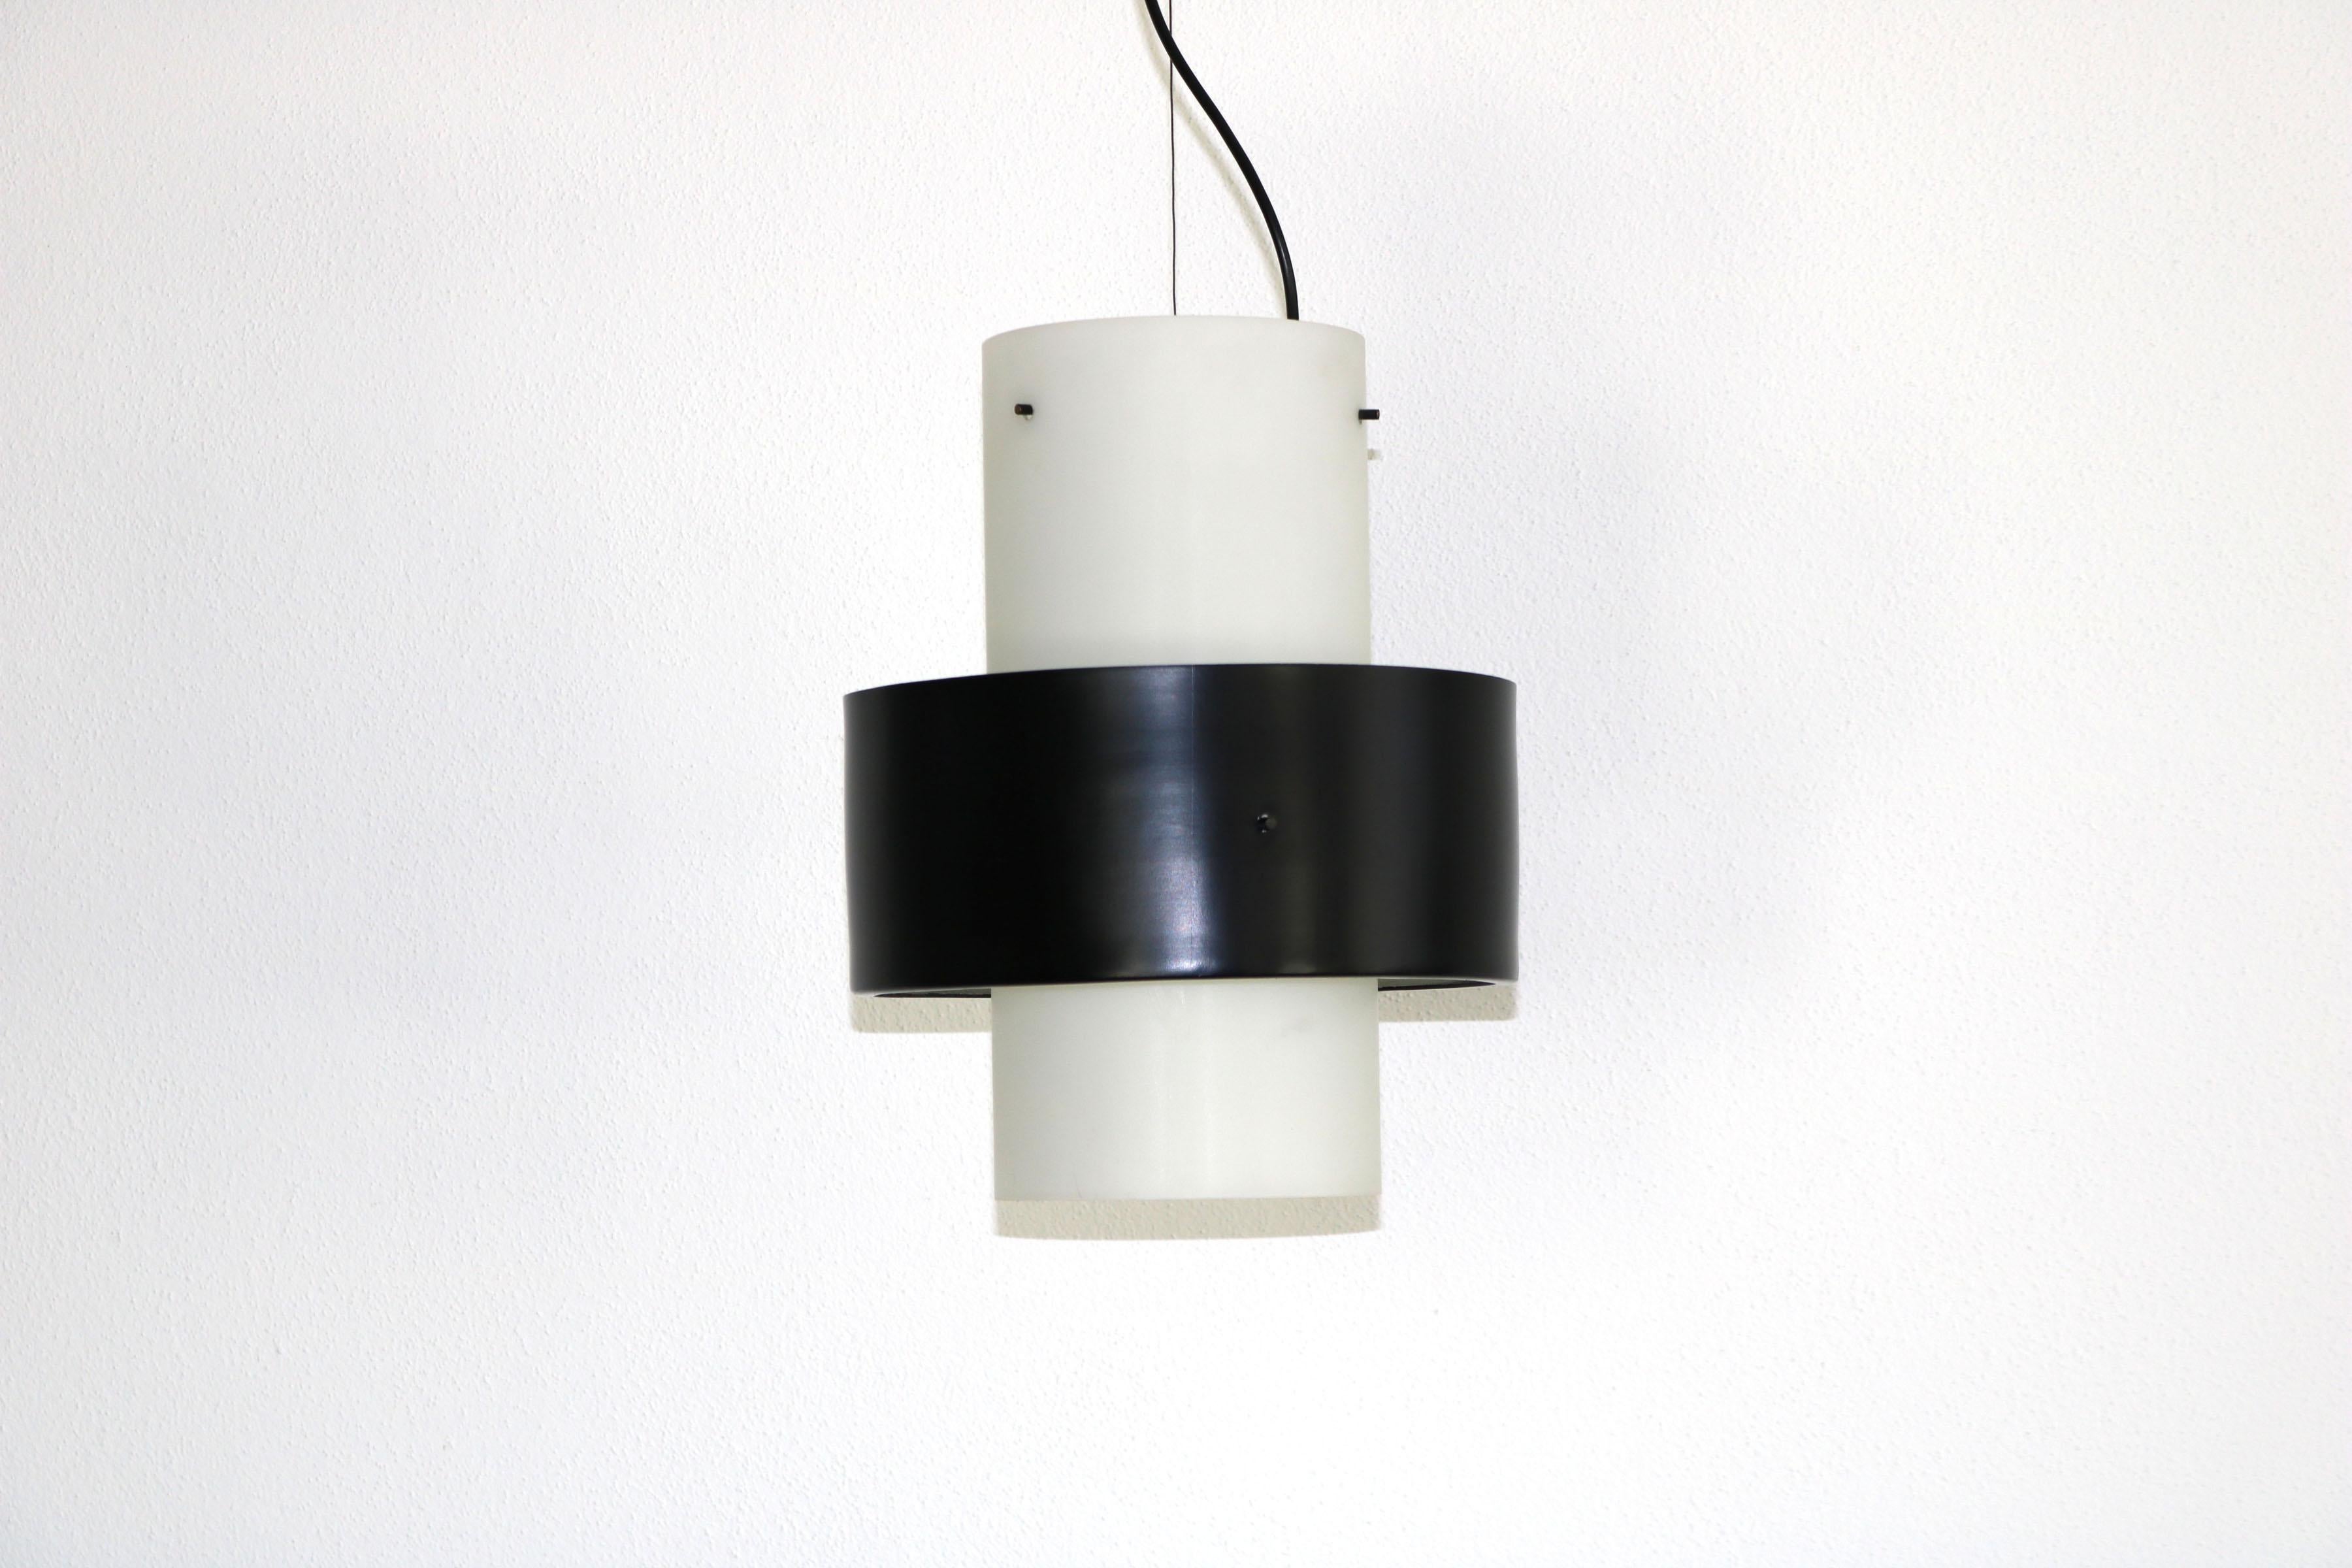 1950s Stilnovo pendant lamp made of frosted opal glass with black lacquered aluminum ring. The lamp is in a very nice original condition.

measurements
Glasring ø 18 cm h 40 cm 
Aluminiumring ø 32 cm  h 14 cm